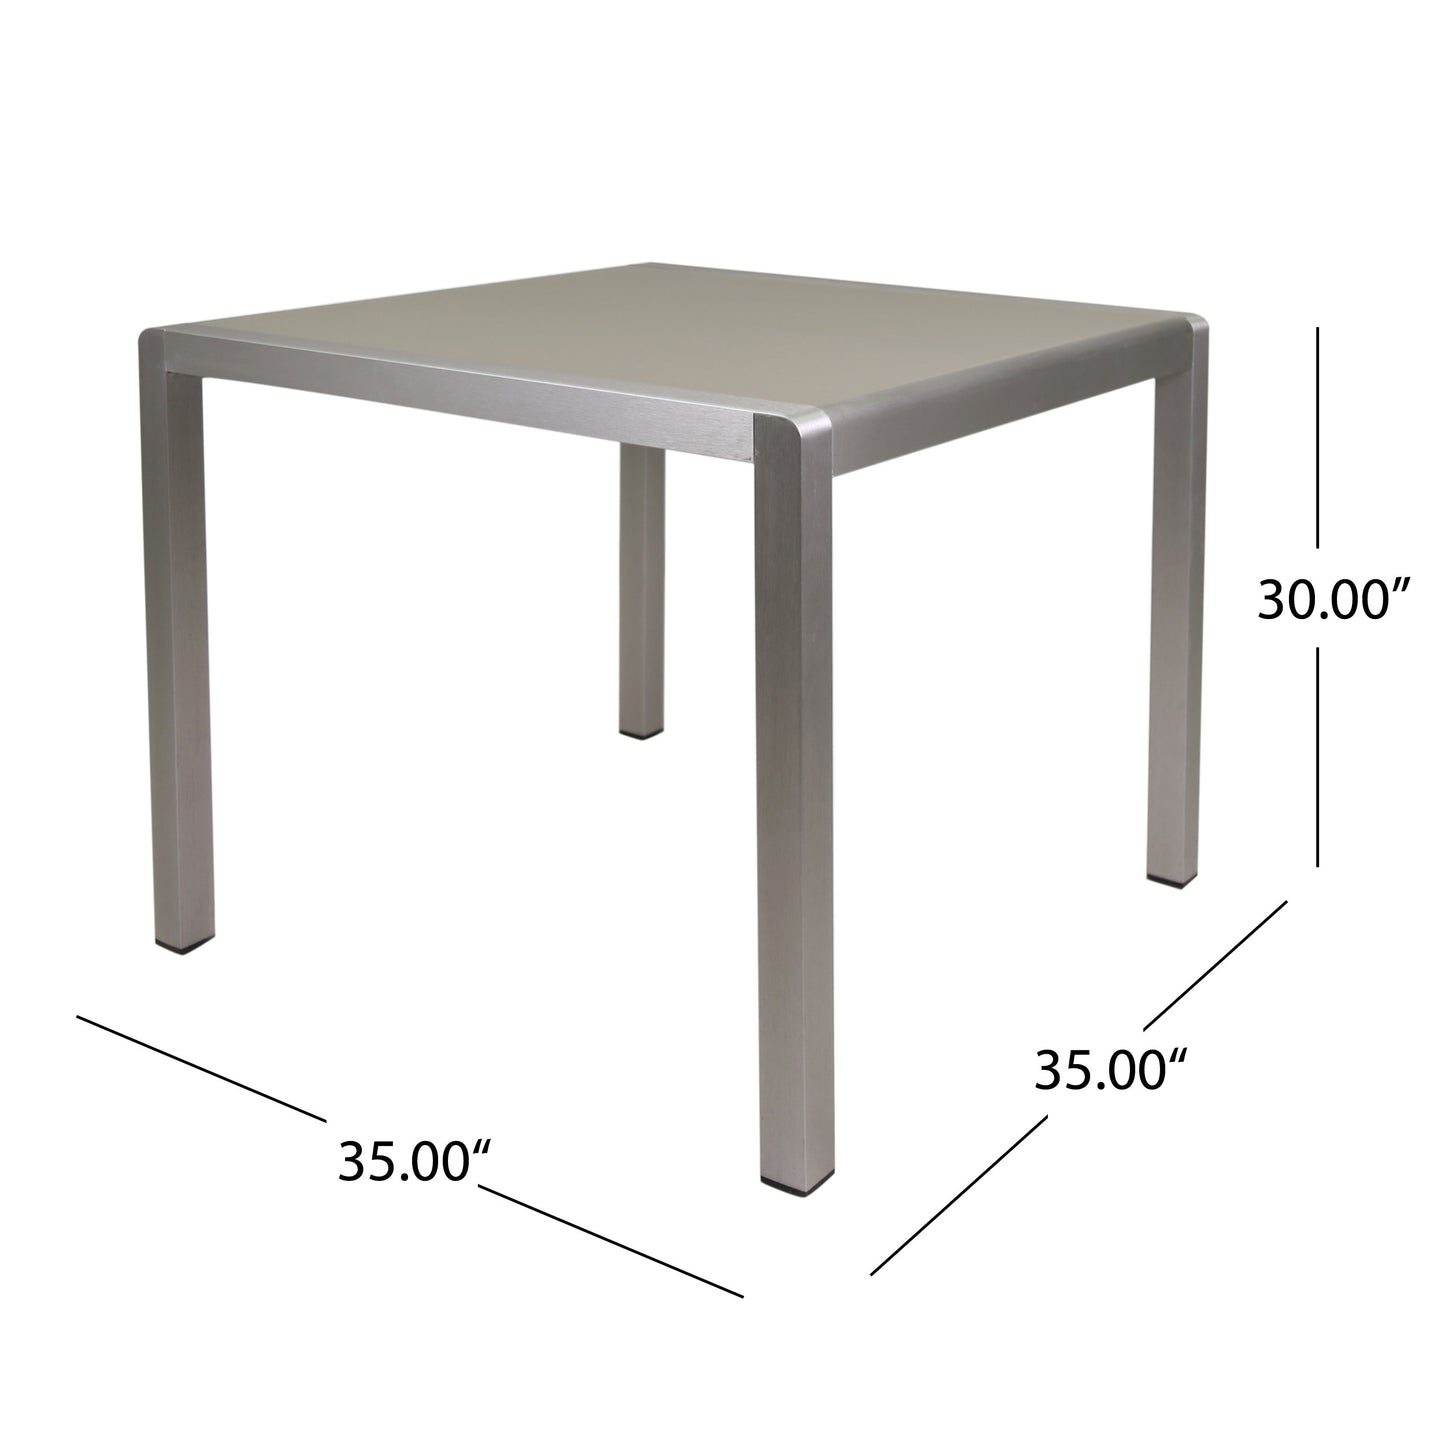 Louie Coral Outdoor Dining Table - Anodized Aluminum - Tempered Glass Table Top - Square - Silver and Gray - 35-inch